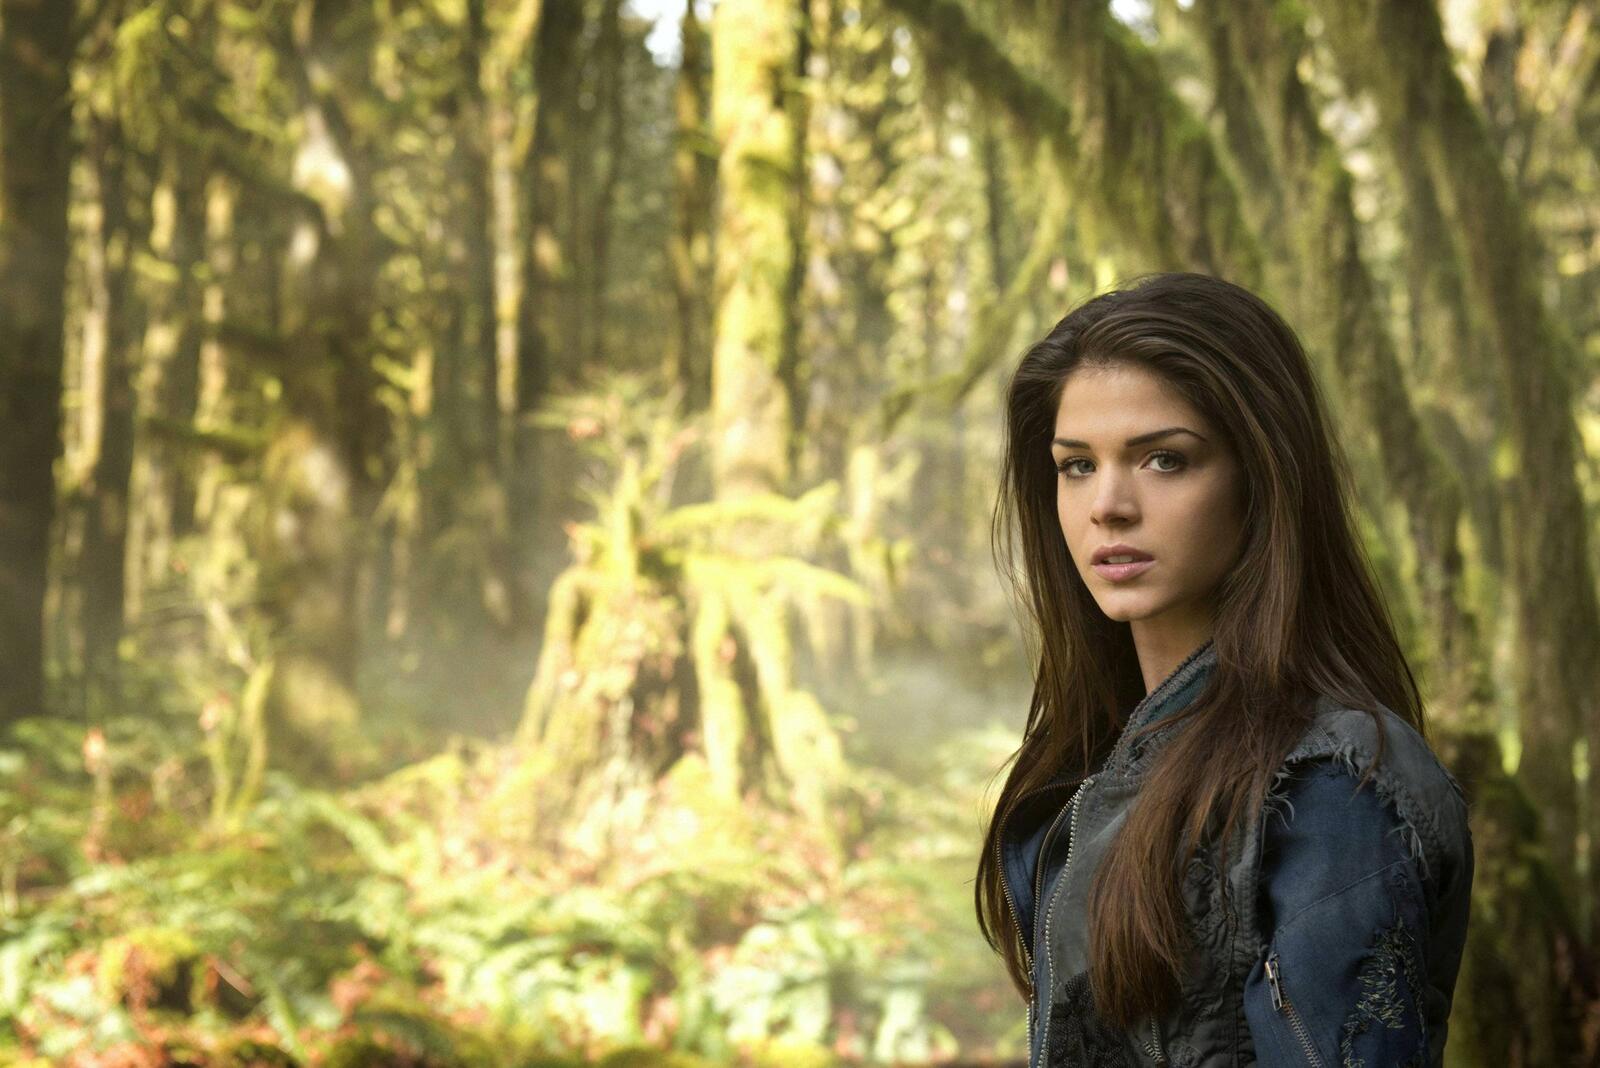 Wallpapers TV show Marie Avgeropoulos celebrities on the desktop